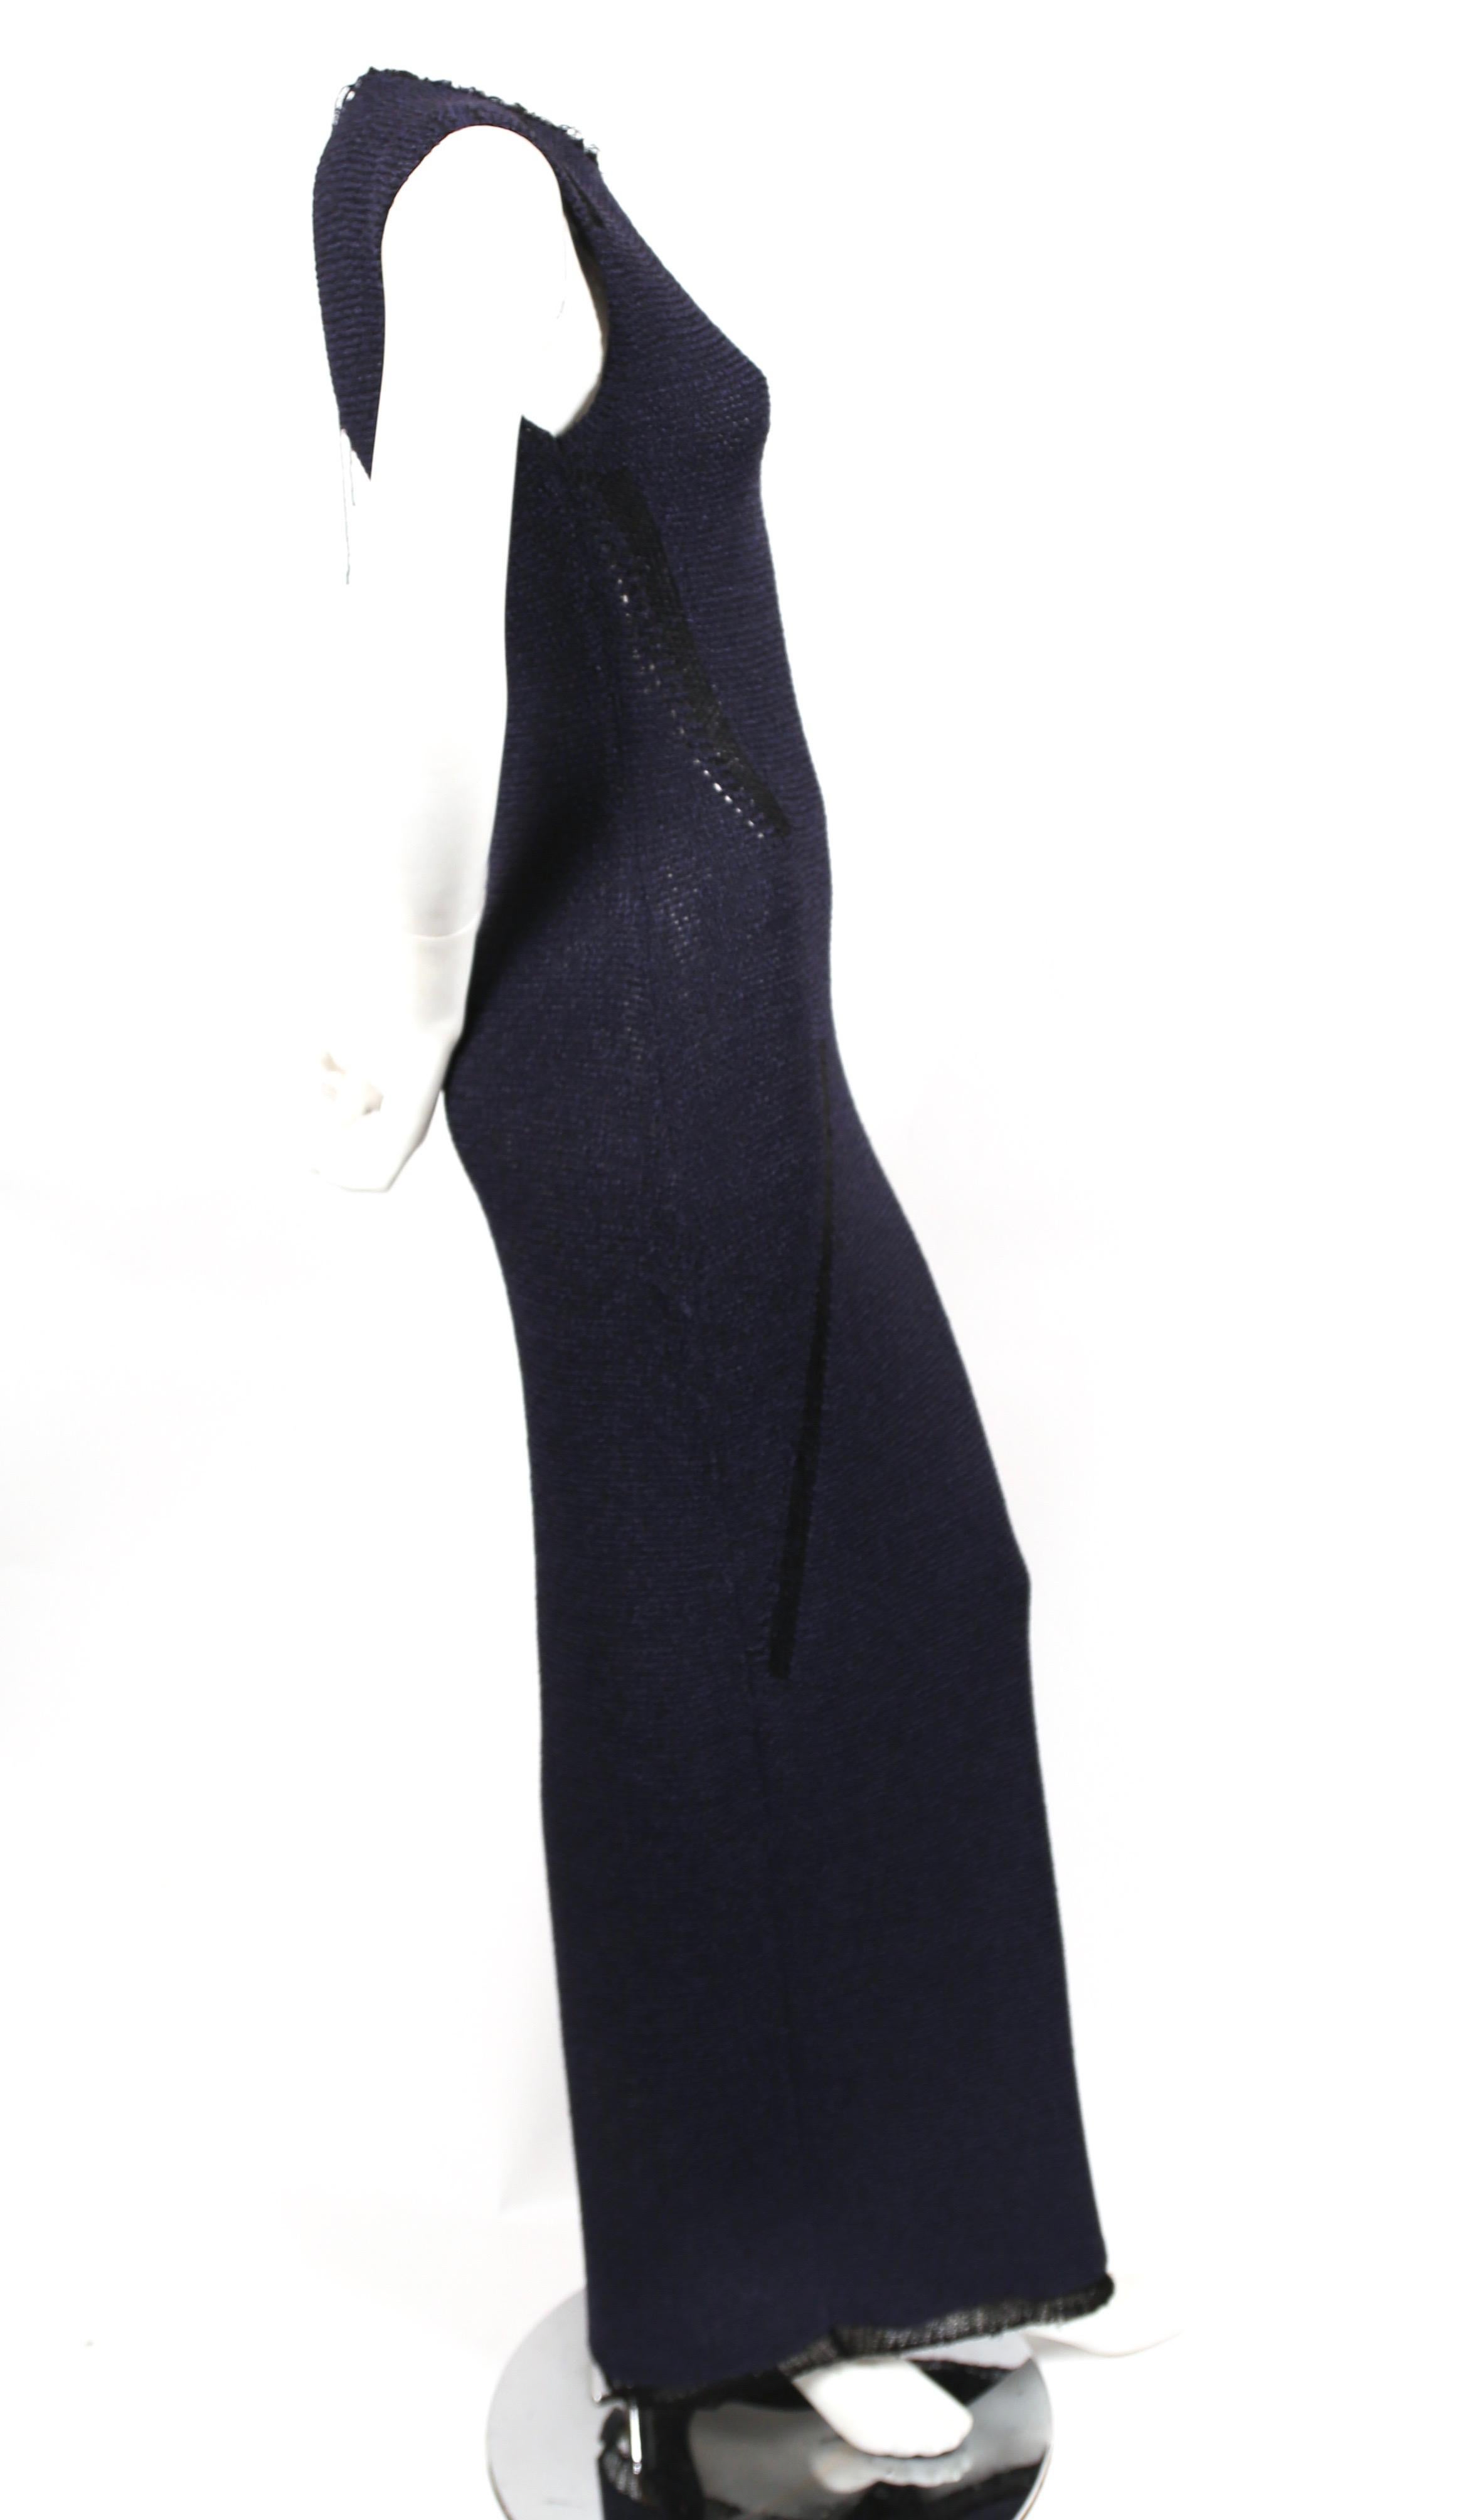 Navy blue and black knit dress with raw collar and delicate woven hem designed by Phoebe Philo for Celine. No size is indicated however this is an XS.  Approximate measurements: shoulder 13